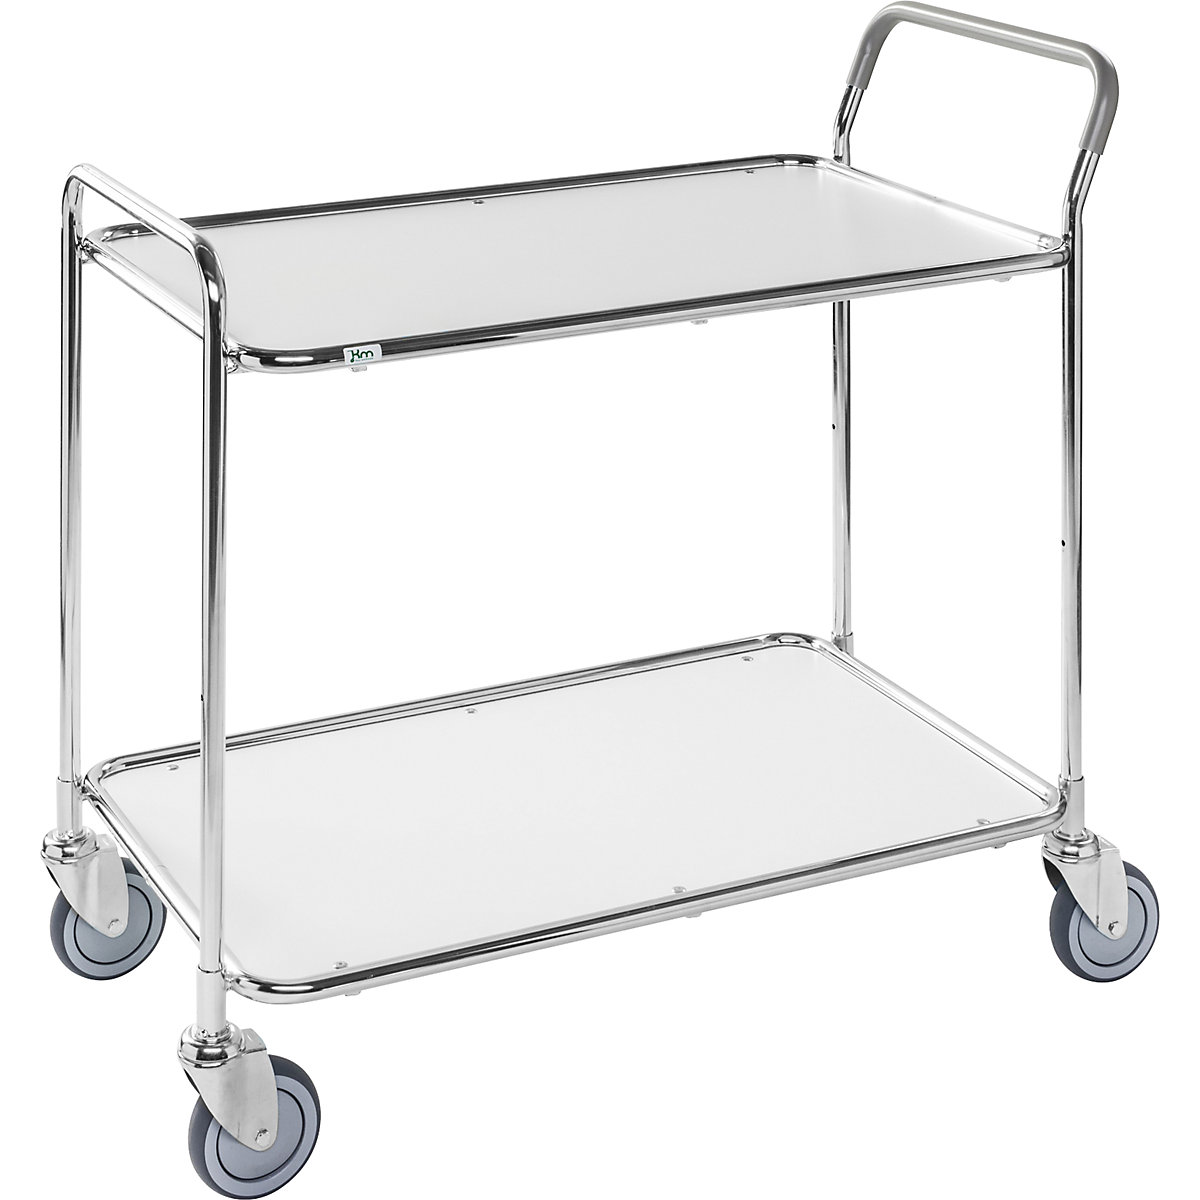 Table trolley – Kongamek, 2 shelves, LxWxH 1020 x 555 x 965 mm, zinc plated / white, 2+ items-6